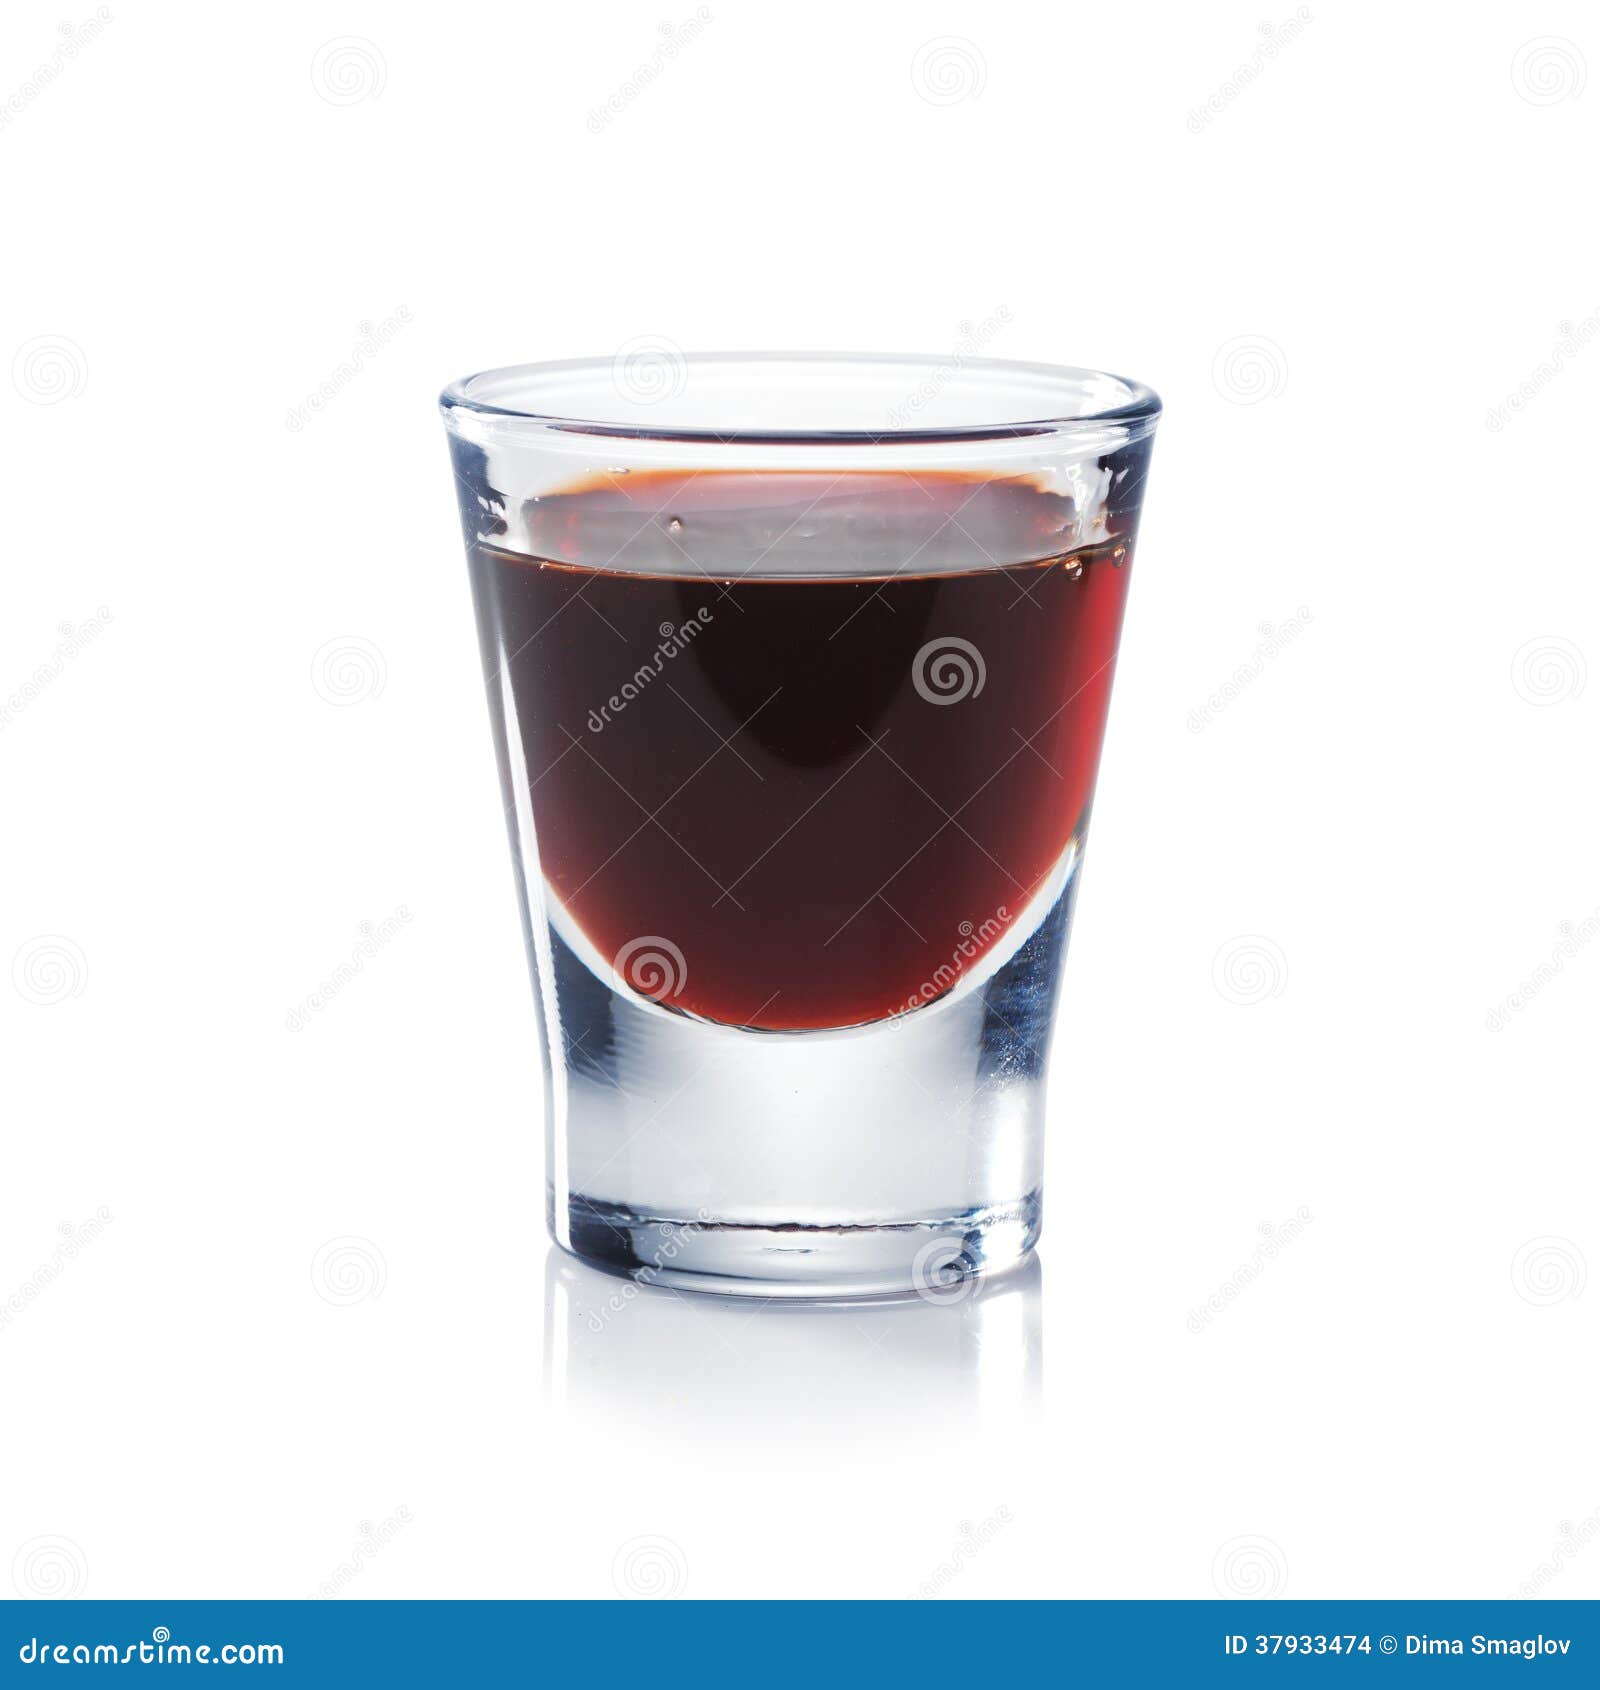 red berries liqueur is the shot glass  on white.